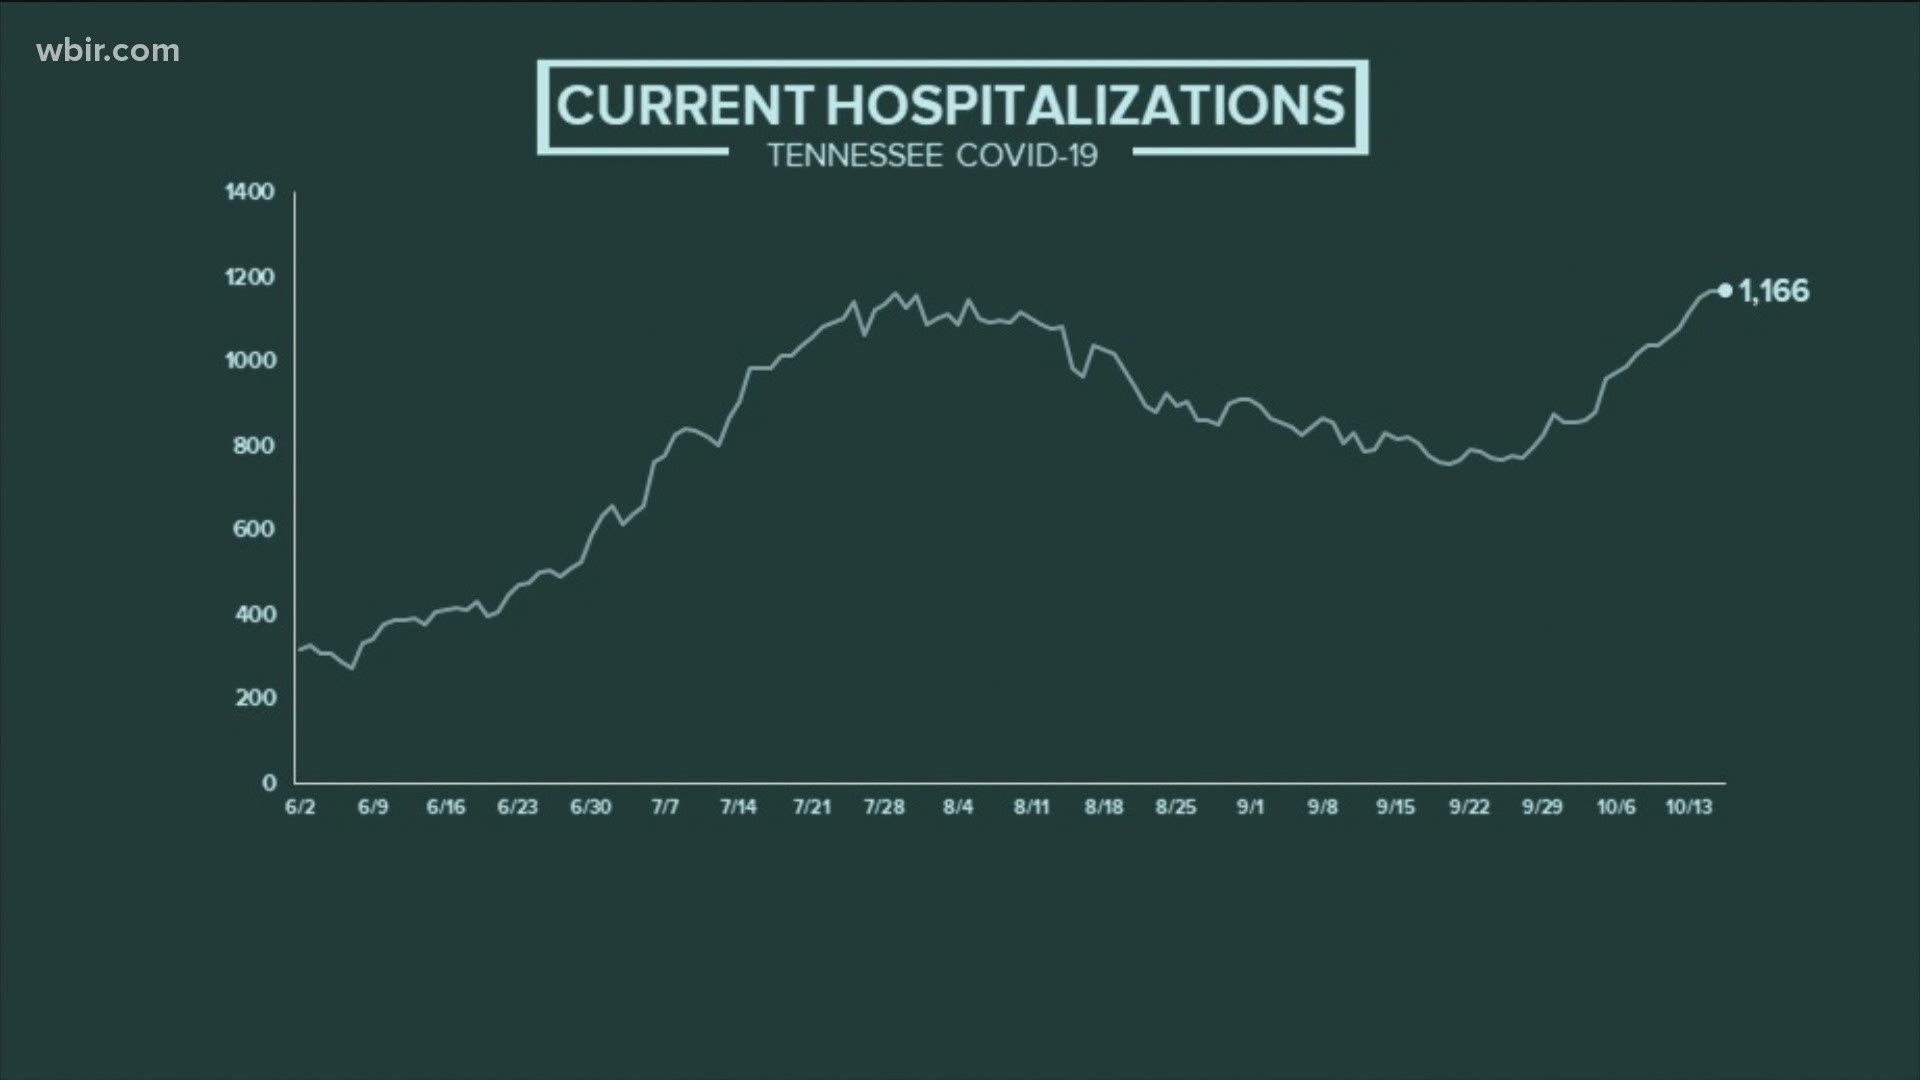 In Tennessee, hospitalizations for COVID-19 are at an all-time high.